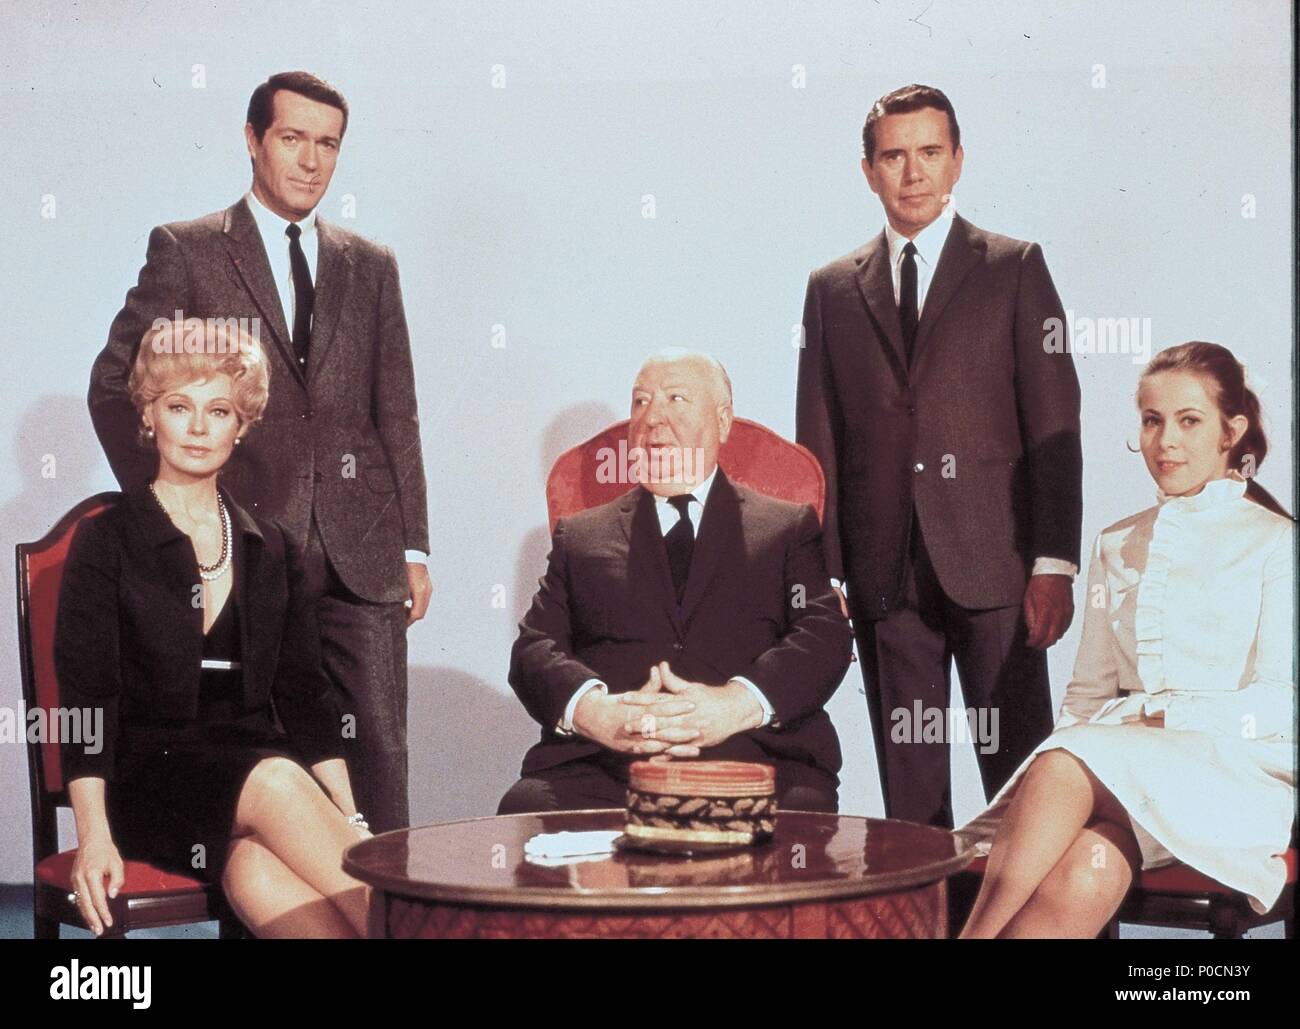 Original Film Title: TOPAZ.  English Title: TOPAZ.  Film Director: ALFRED HITCHCOCK.  Year: 1969.  Stars: DANY ROBIN; JOHN FORSYTHE; CLAUDE JADE; ALFRED HITCHCOCK; FREDERICK STAFFORD. Credit: UNIVERSAL PICTURES / Album Stock Photo